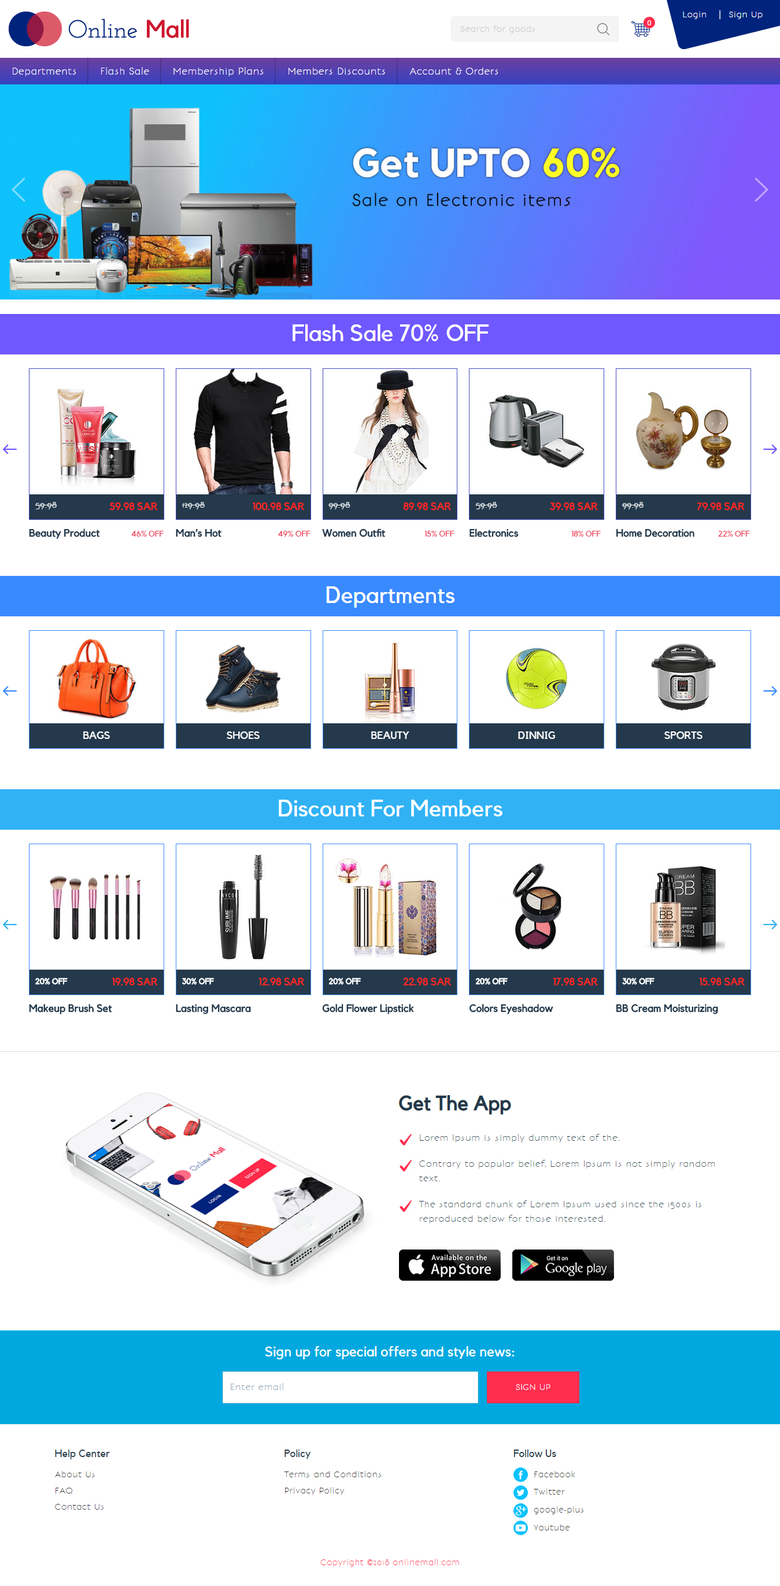 Multi-vendor eCommerce website With Android, iOS apps.